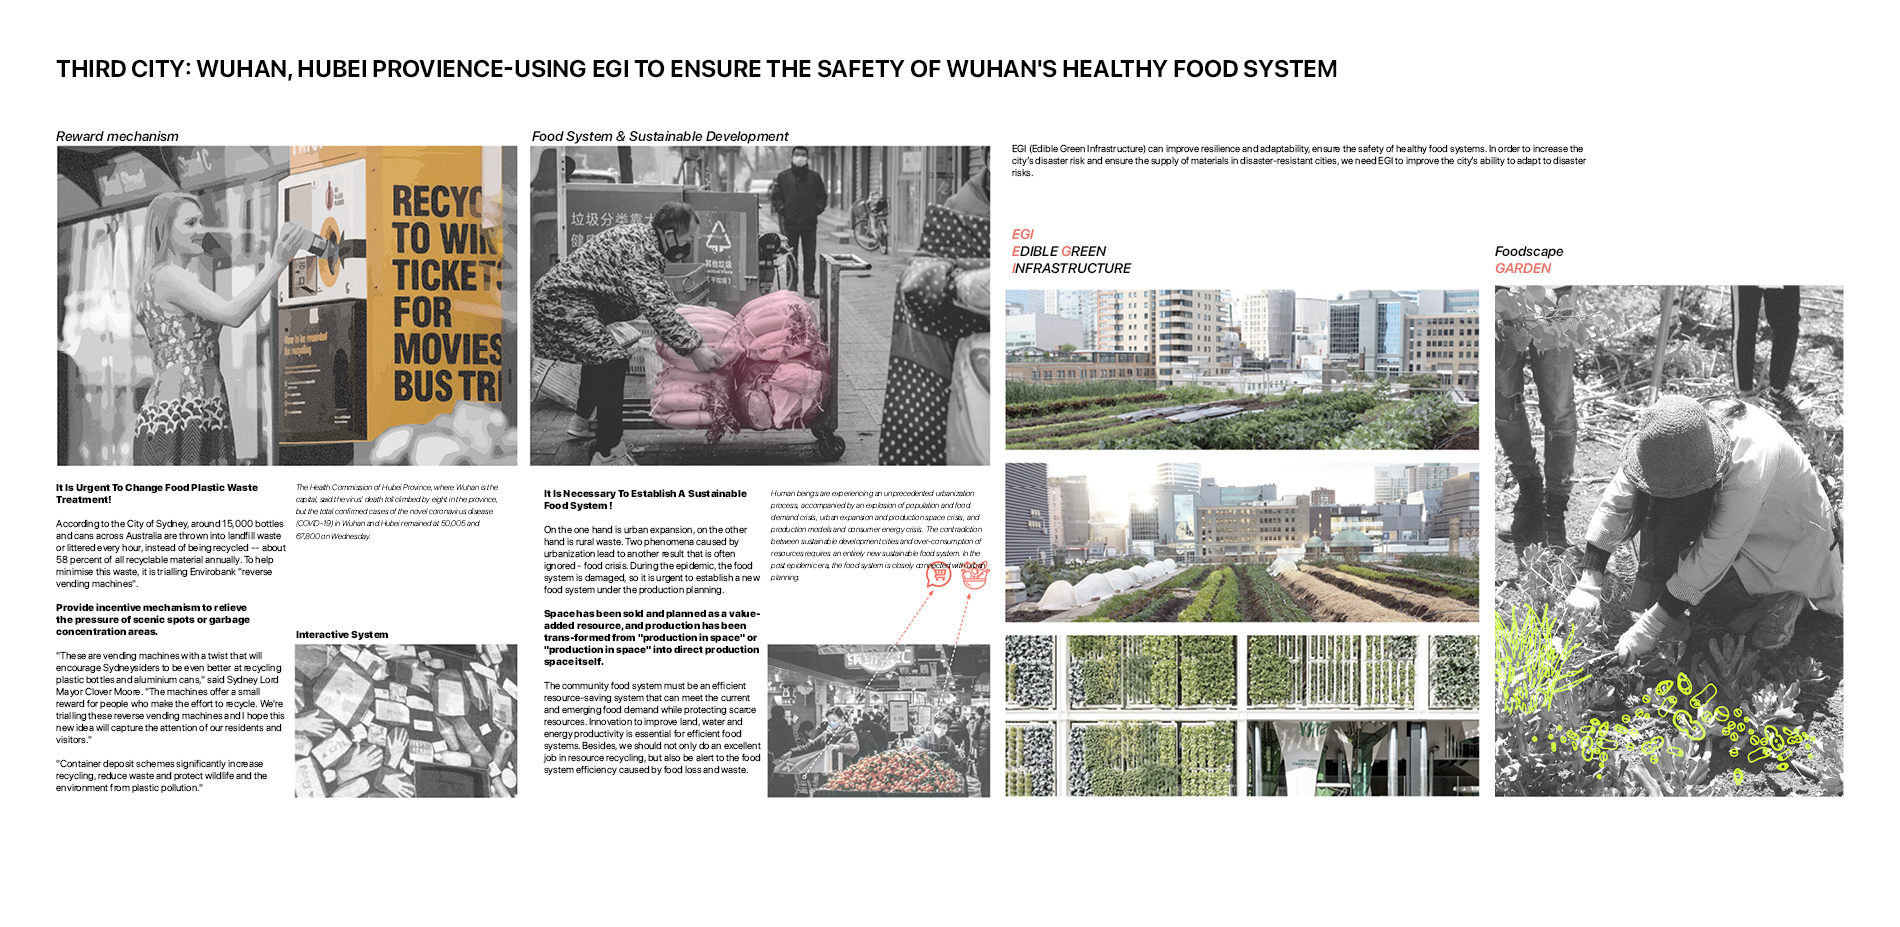 Using EGI to Ensure the Safety of Wuhan's Healthy Food System (Wuhan)